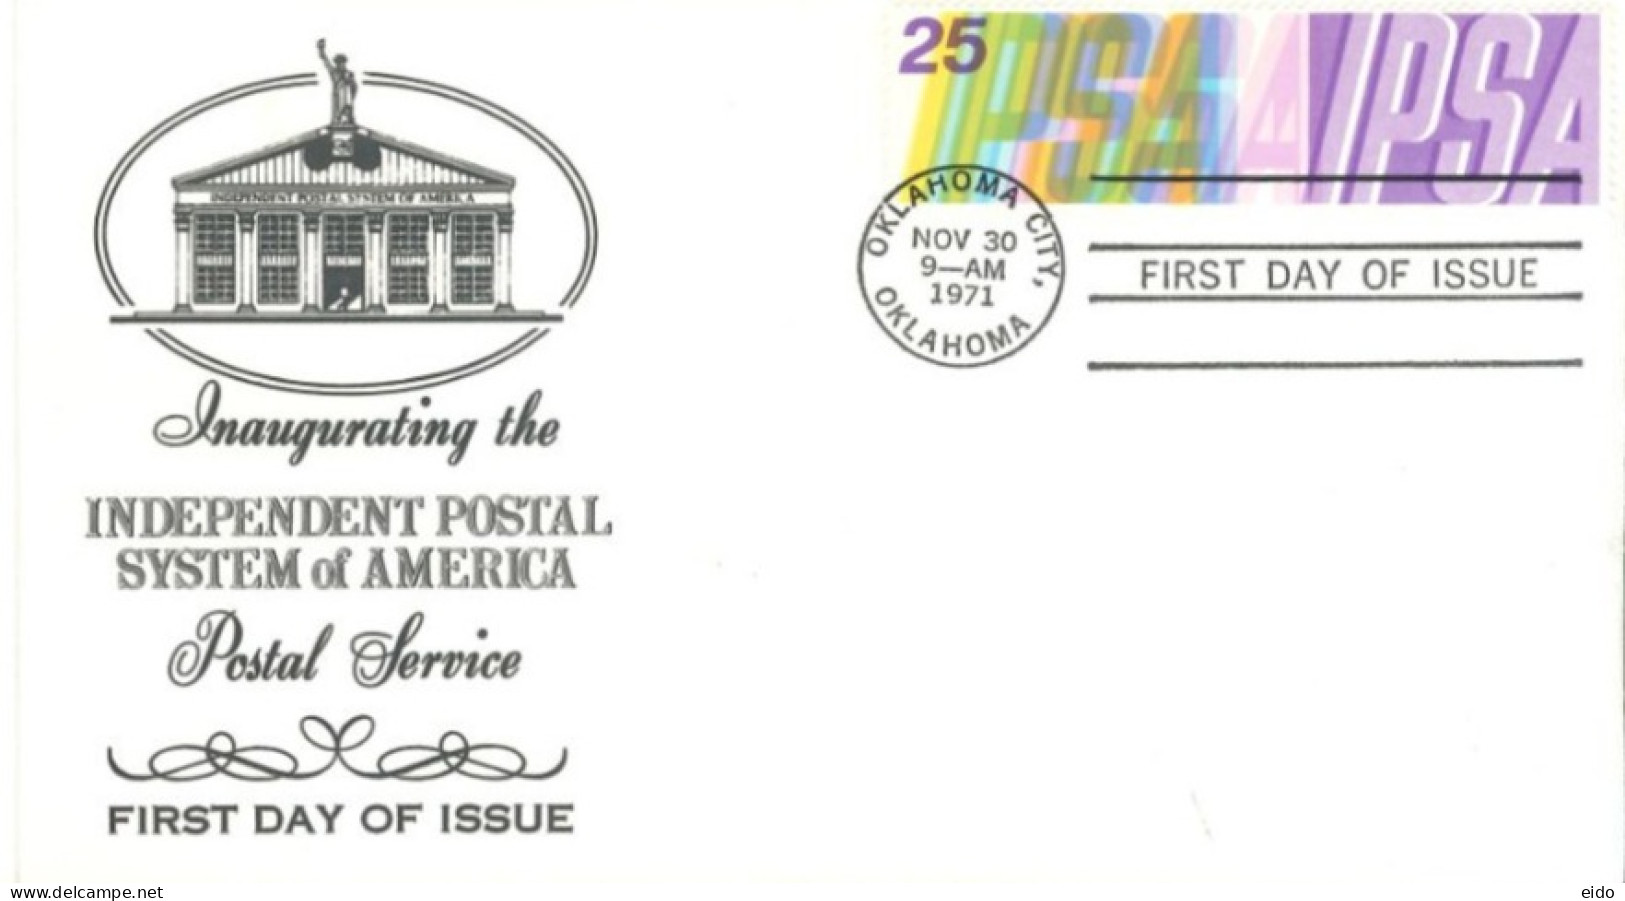 U.S.A.. -1971 - FDC STAMP OF INAUGURATING THE INDEPENDENT POSTAL SYSTEM OF AMERICA - Covers & Documents